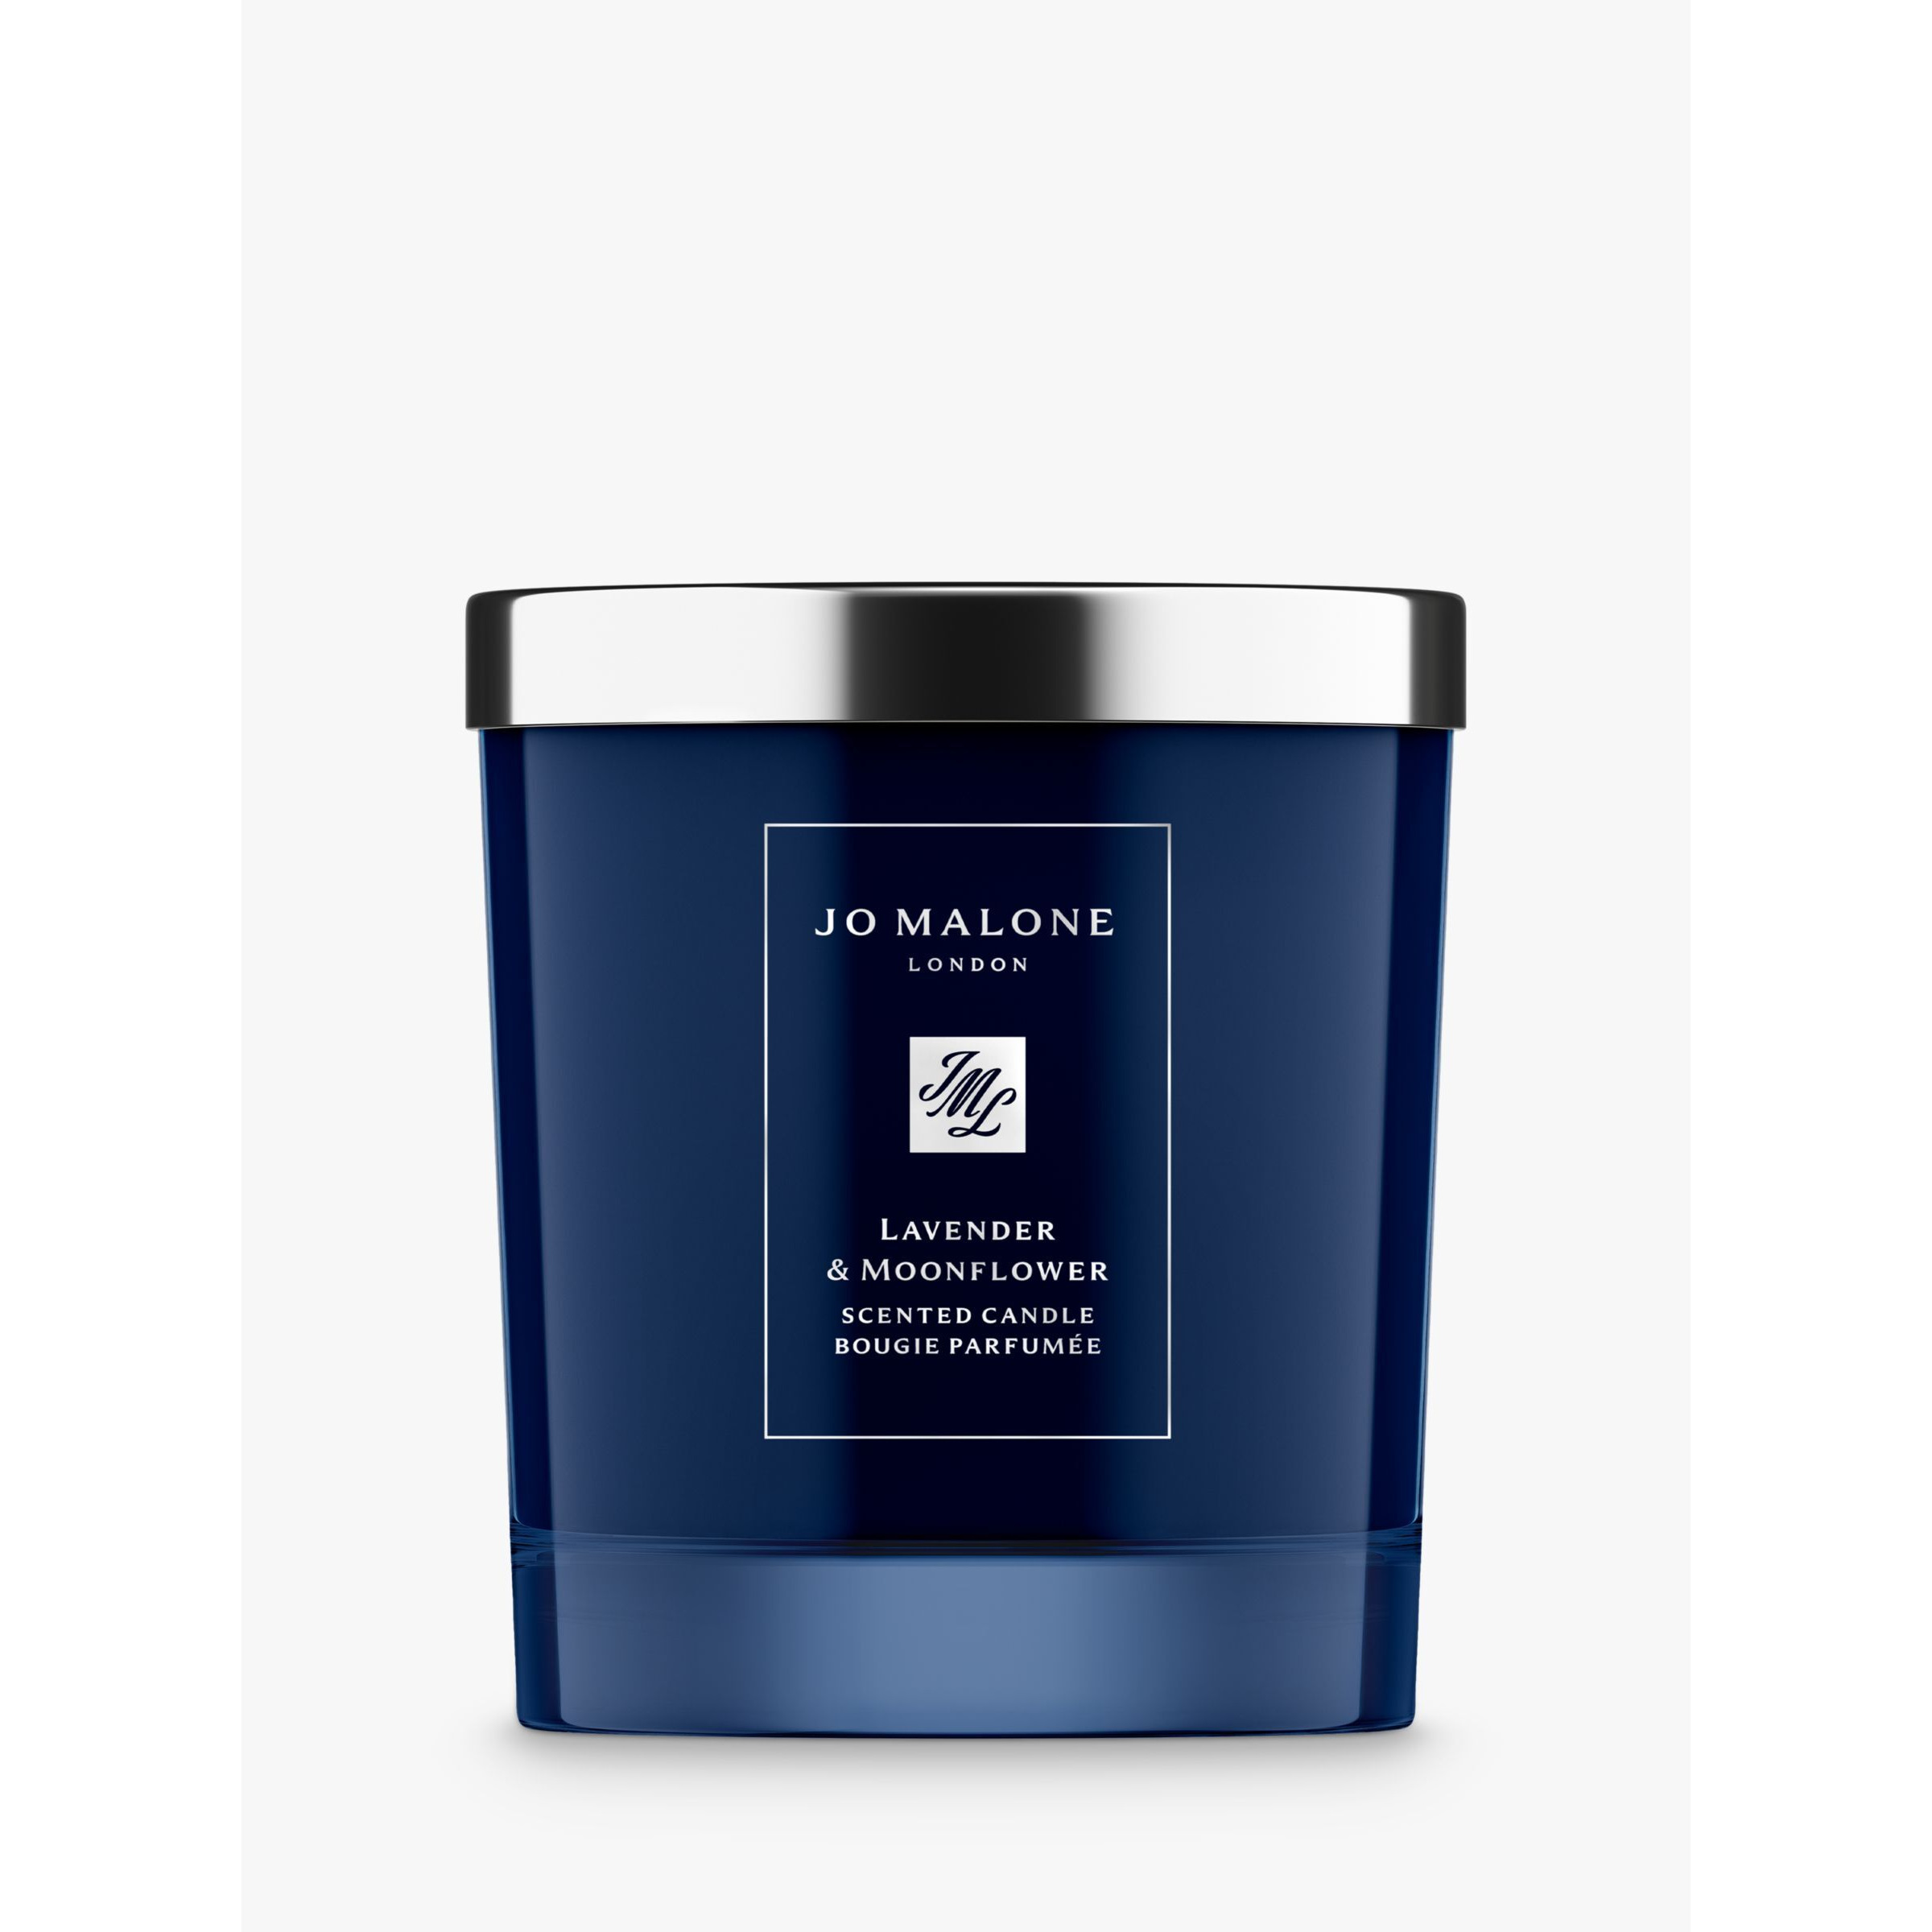 Jo Malone London Lavender & Moonflower Scented Home Candle, 200g - image 1